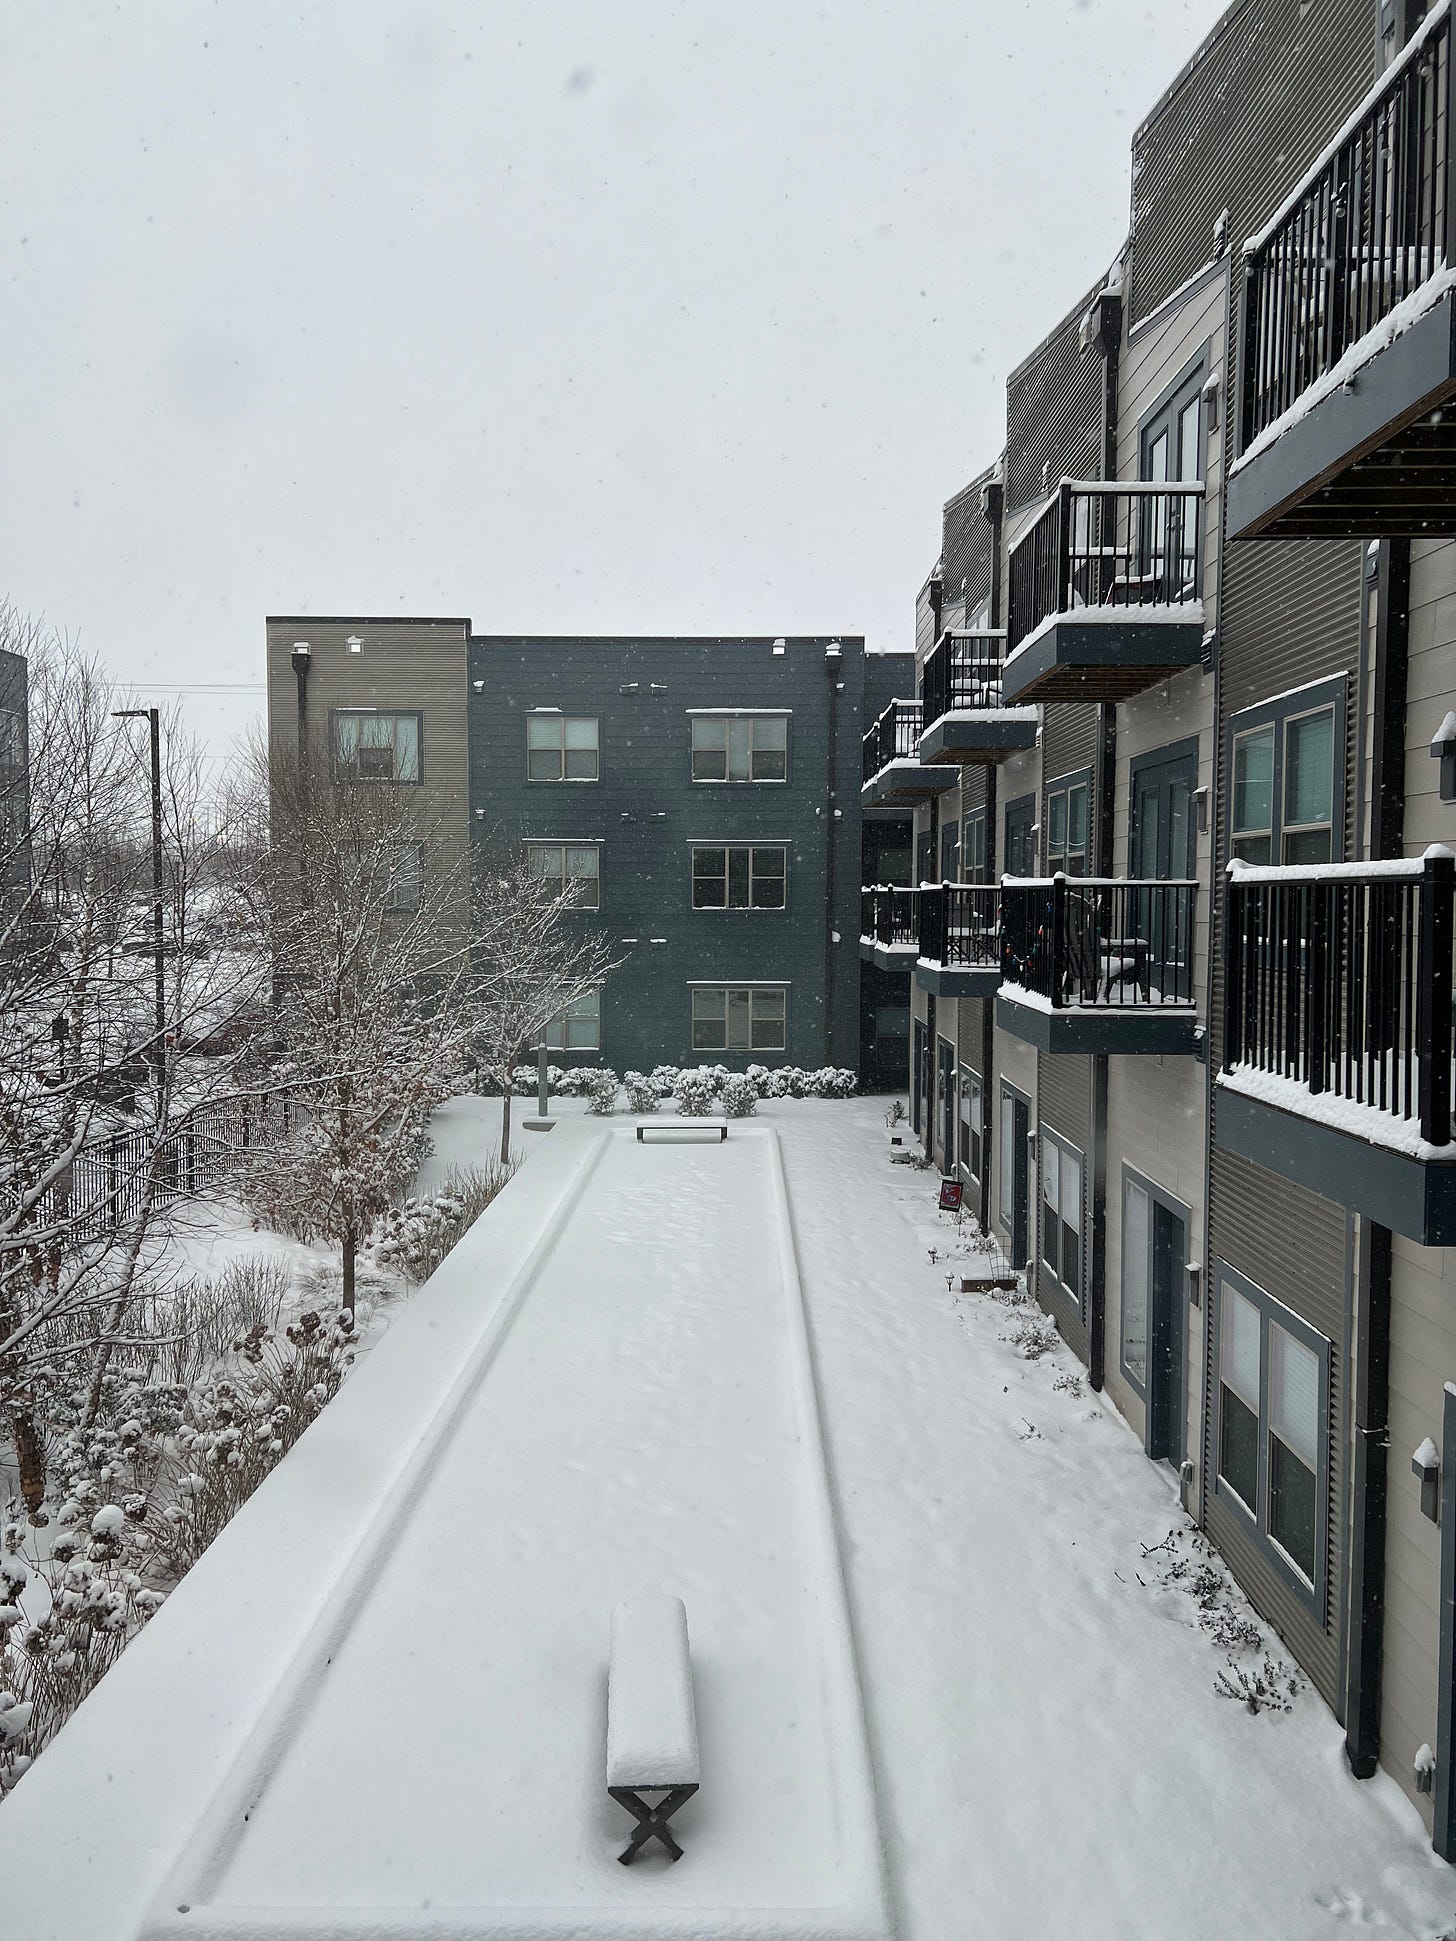 Image of snow atop a bocce ball court, many apartment patios, and barren wintry trees, at an apartment complex